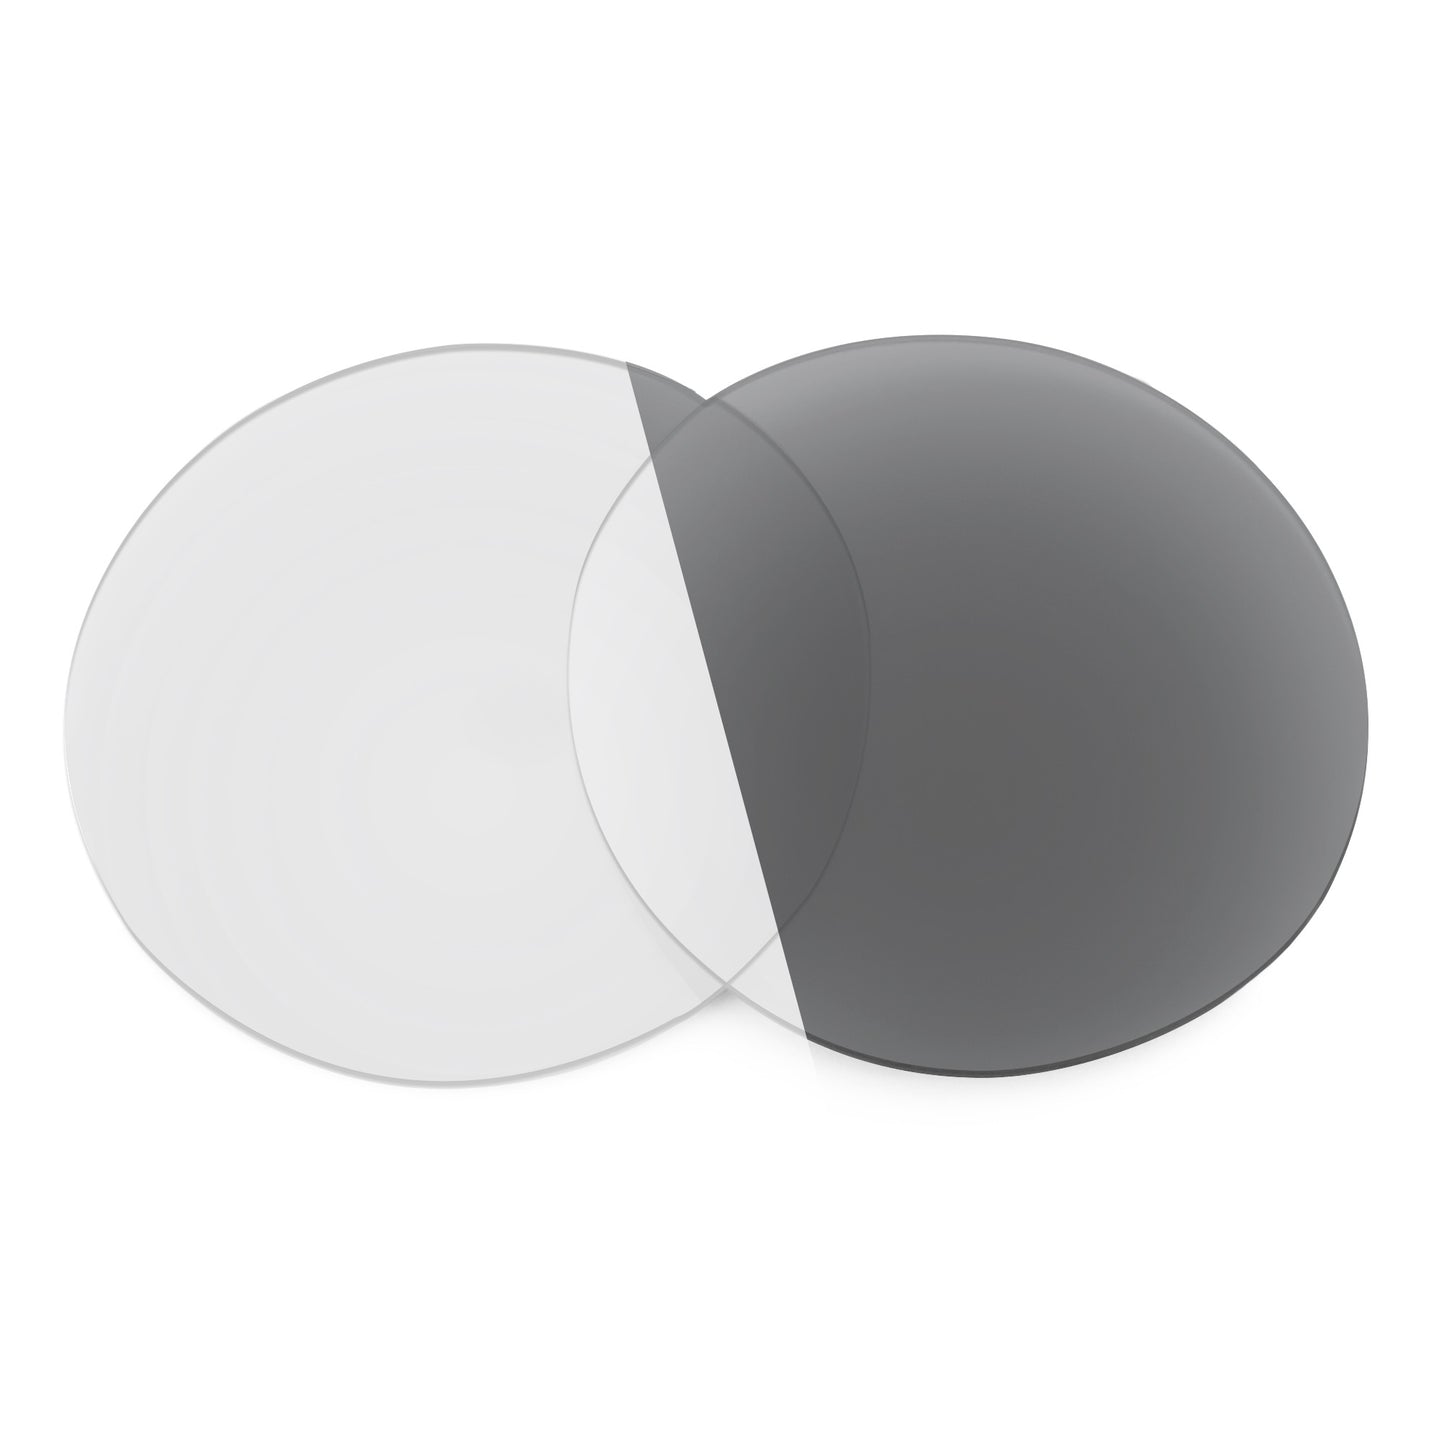 Revant replacement lenses for Ray-Ban RB4266 49mm Non-Polarized Adapt Gray Photochromic